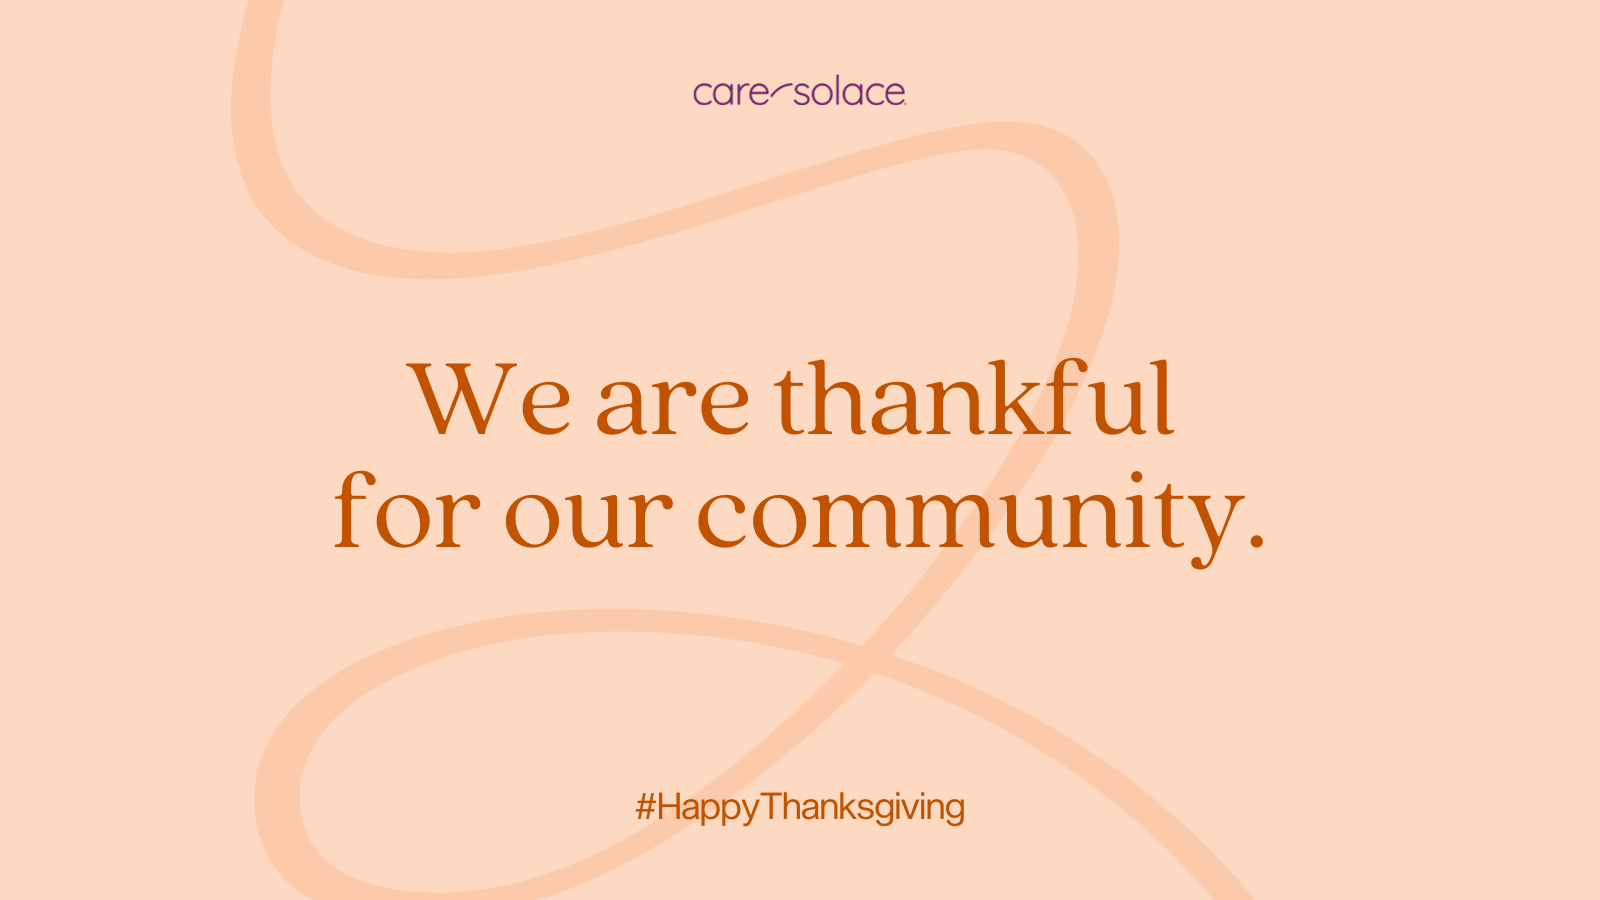 Care Solace - We are thankful for our community. #Happy Thanksgiving